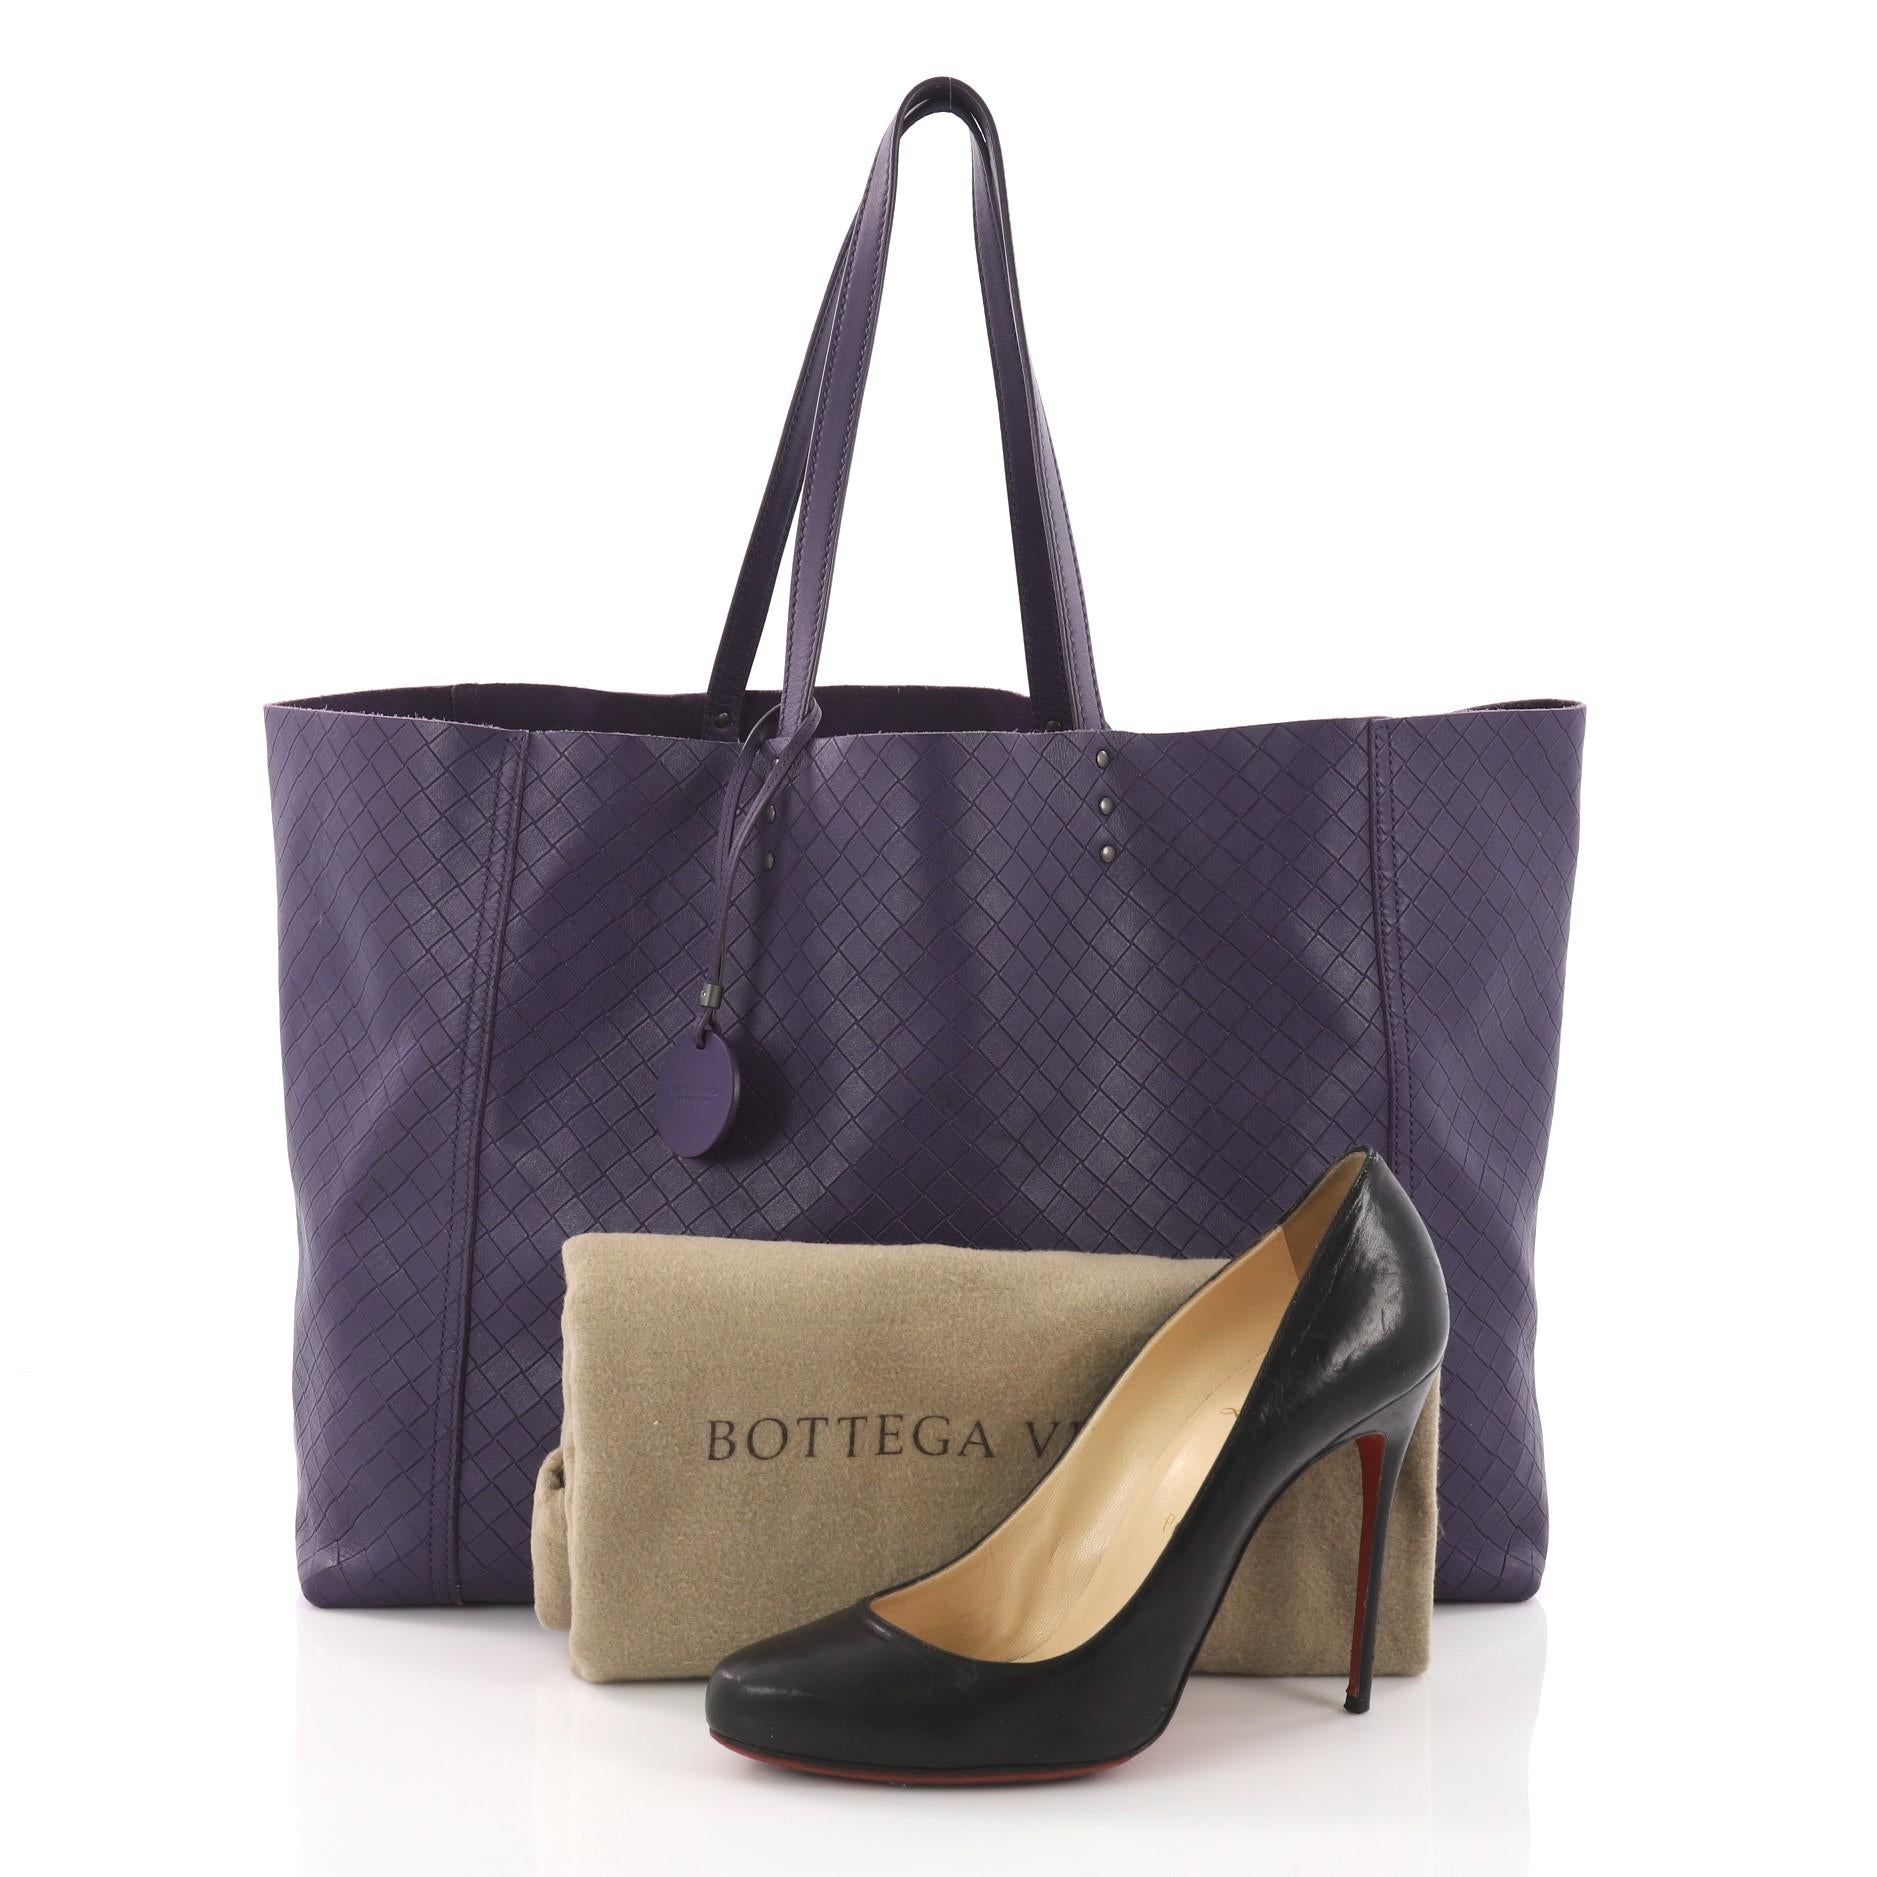 This Bottega Veneta Intrecciomirage Tote Leather Large, crafted in purple intrecciomirage leather, features dual tall leather top handles and gunmetal-tone hardware. It opens to a purple raw leather interior. **Note: Shoe photographed is used as a